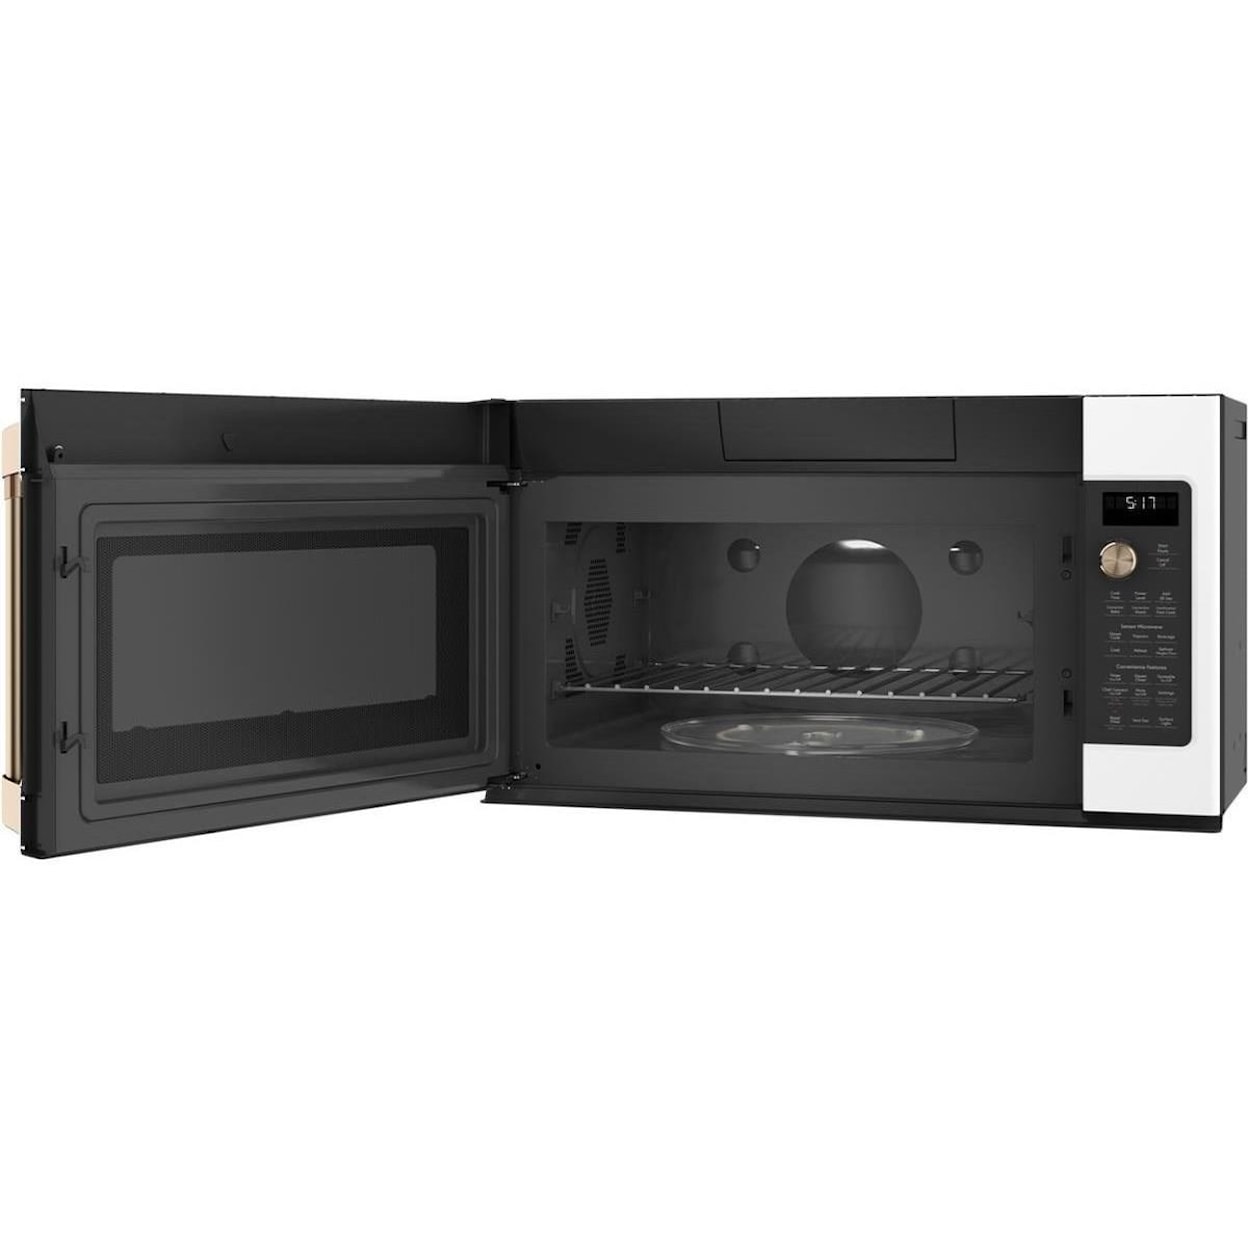 GE Appliances GE Cafe´ Microwave Oven Cafe´™ 1.7 Cu. Ft. Convection Microwave Oven